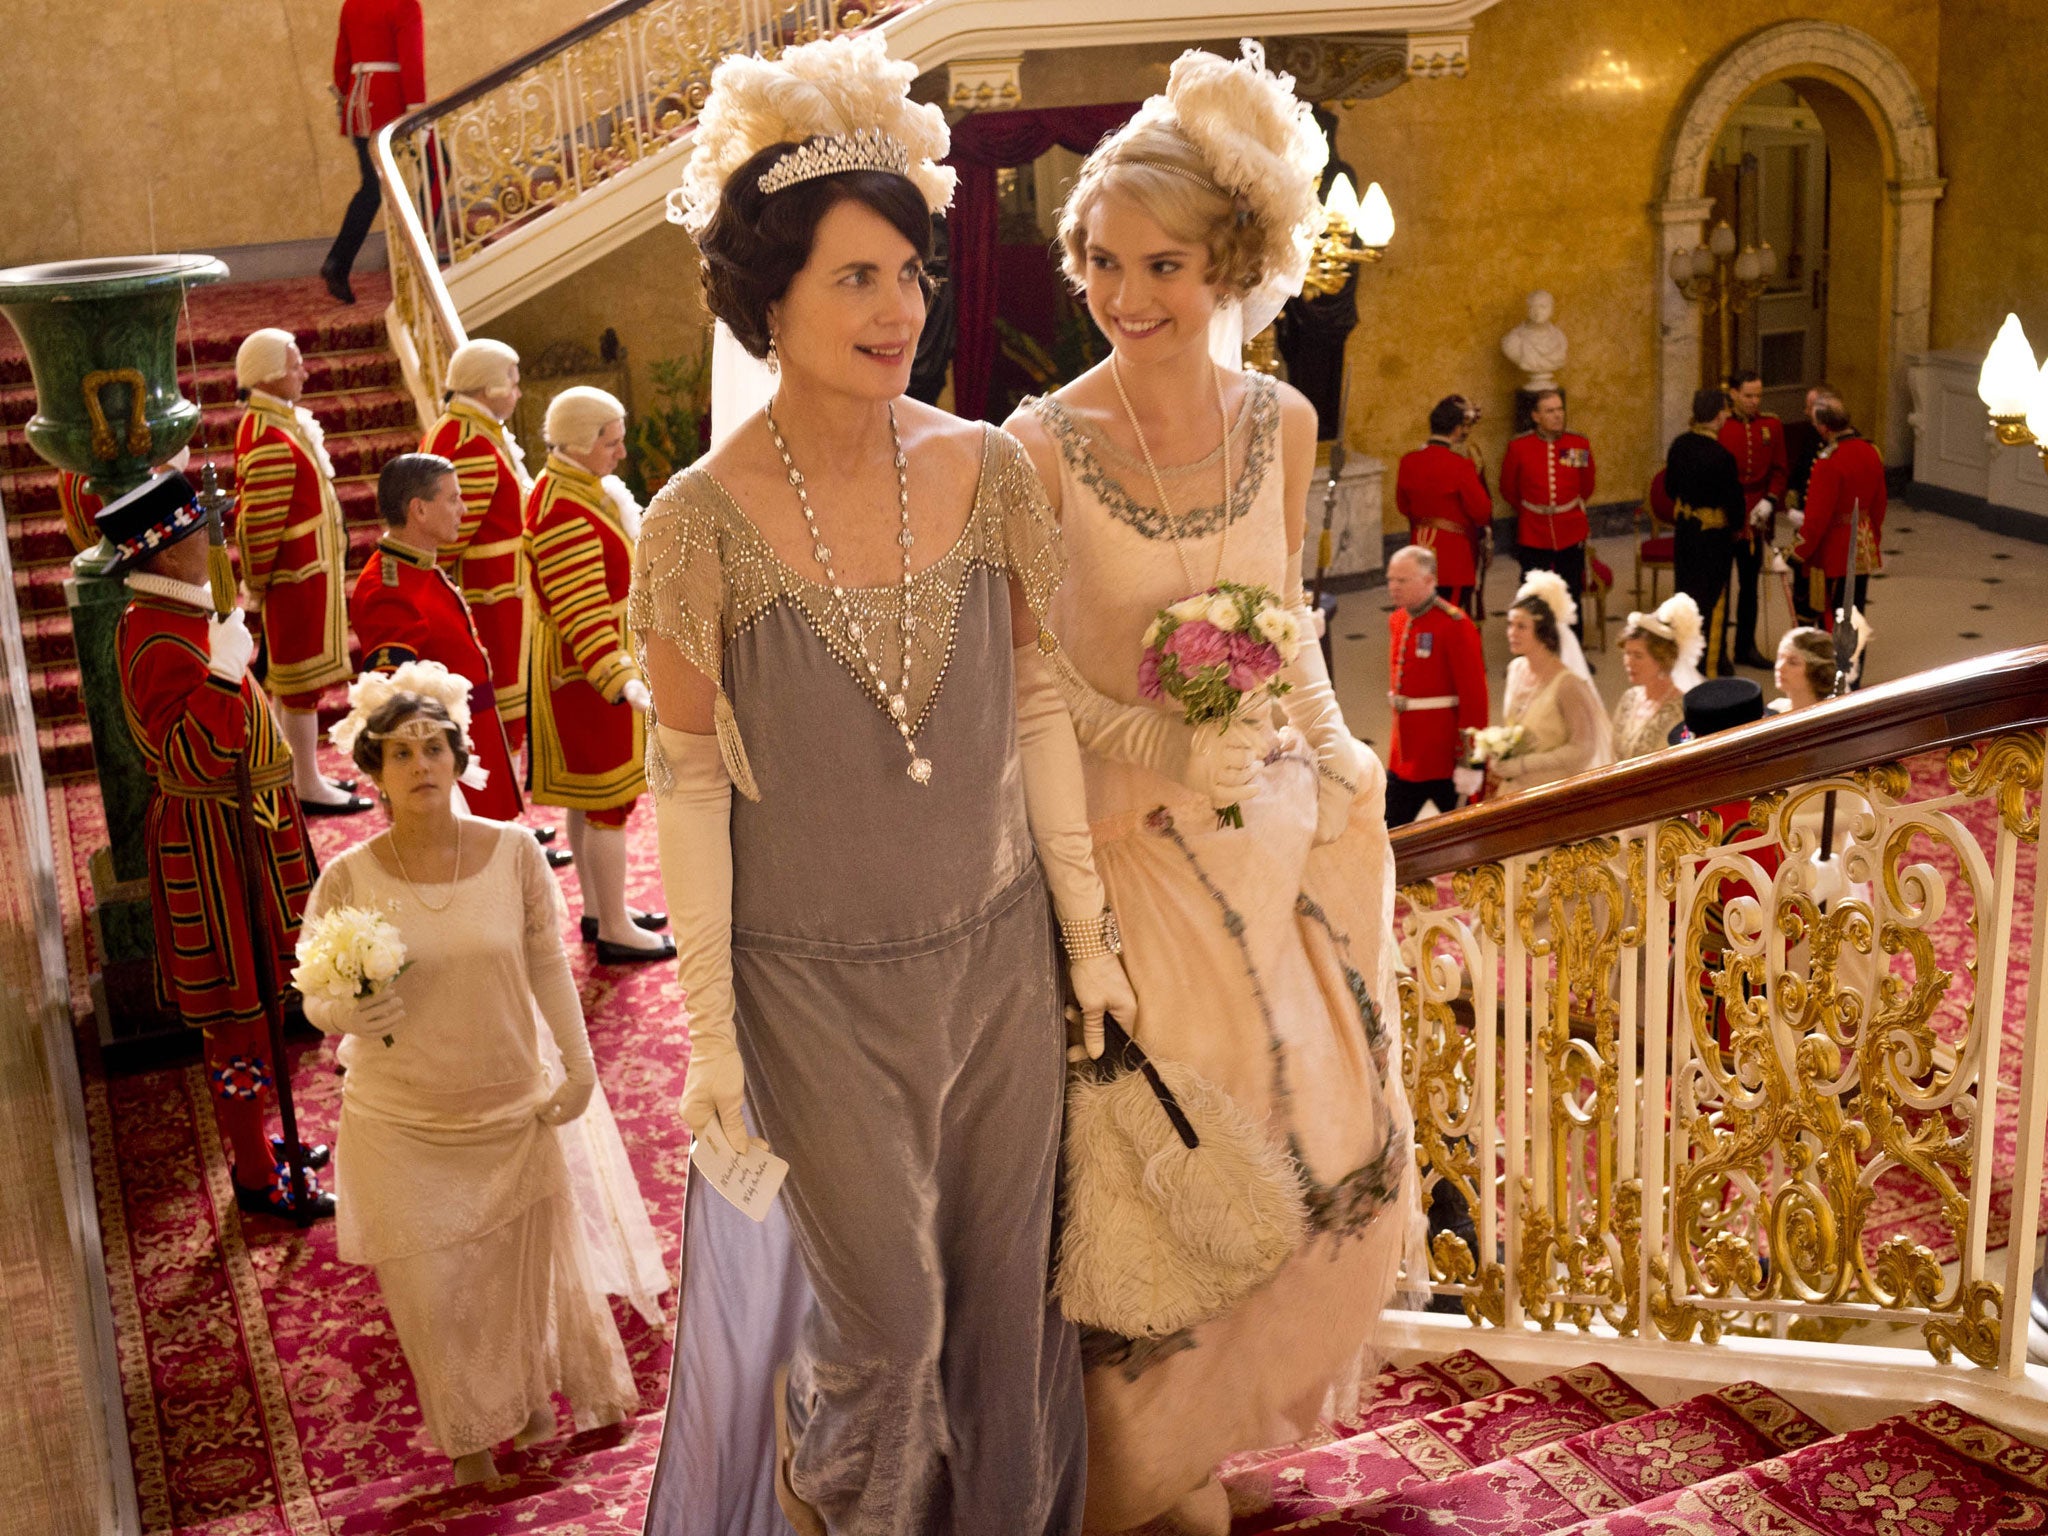 The AXA Framlington UK Mid Cap Fund has a stake in ITV, which had a huge broadcast hit with Downton Abbey